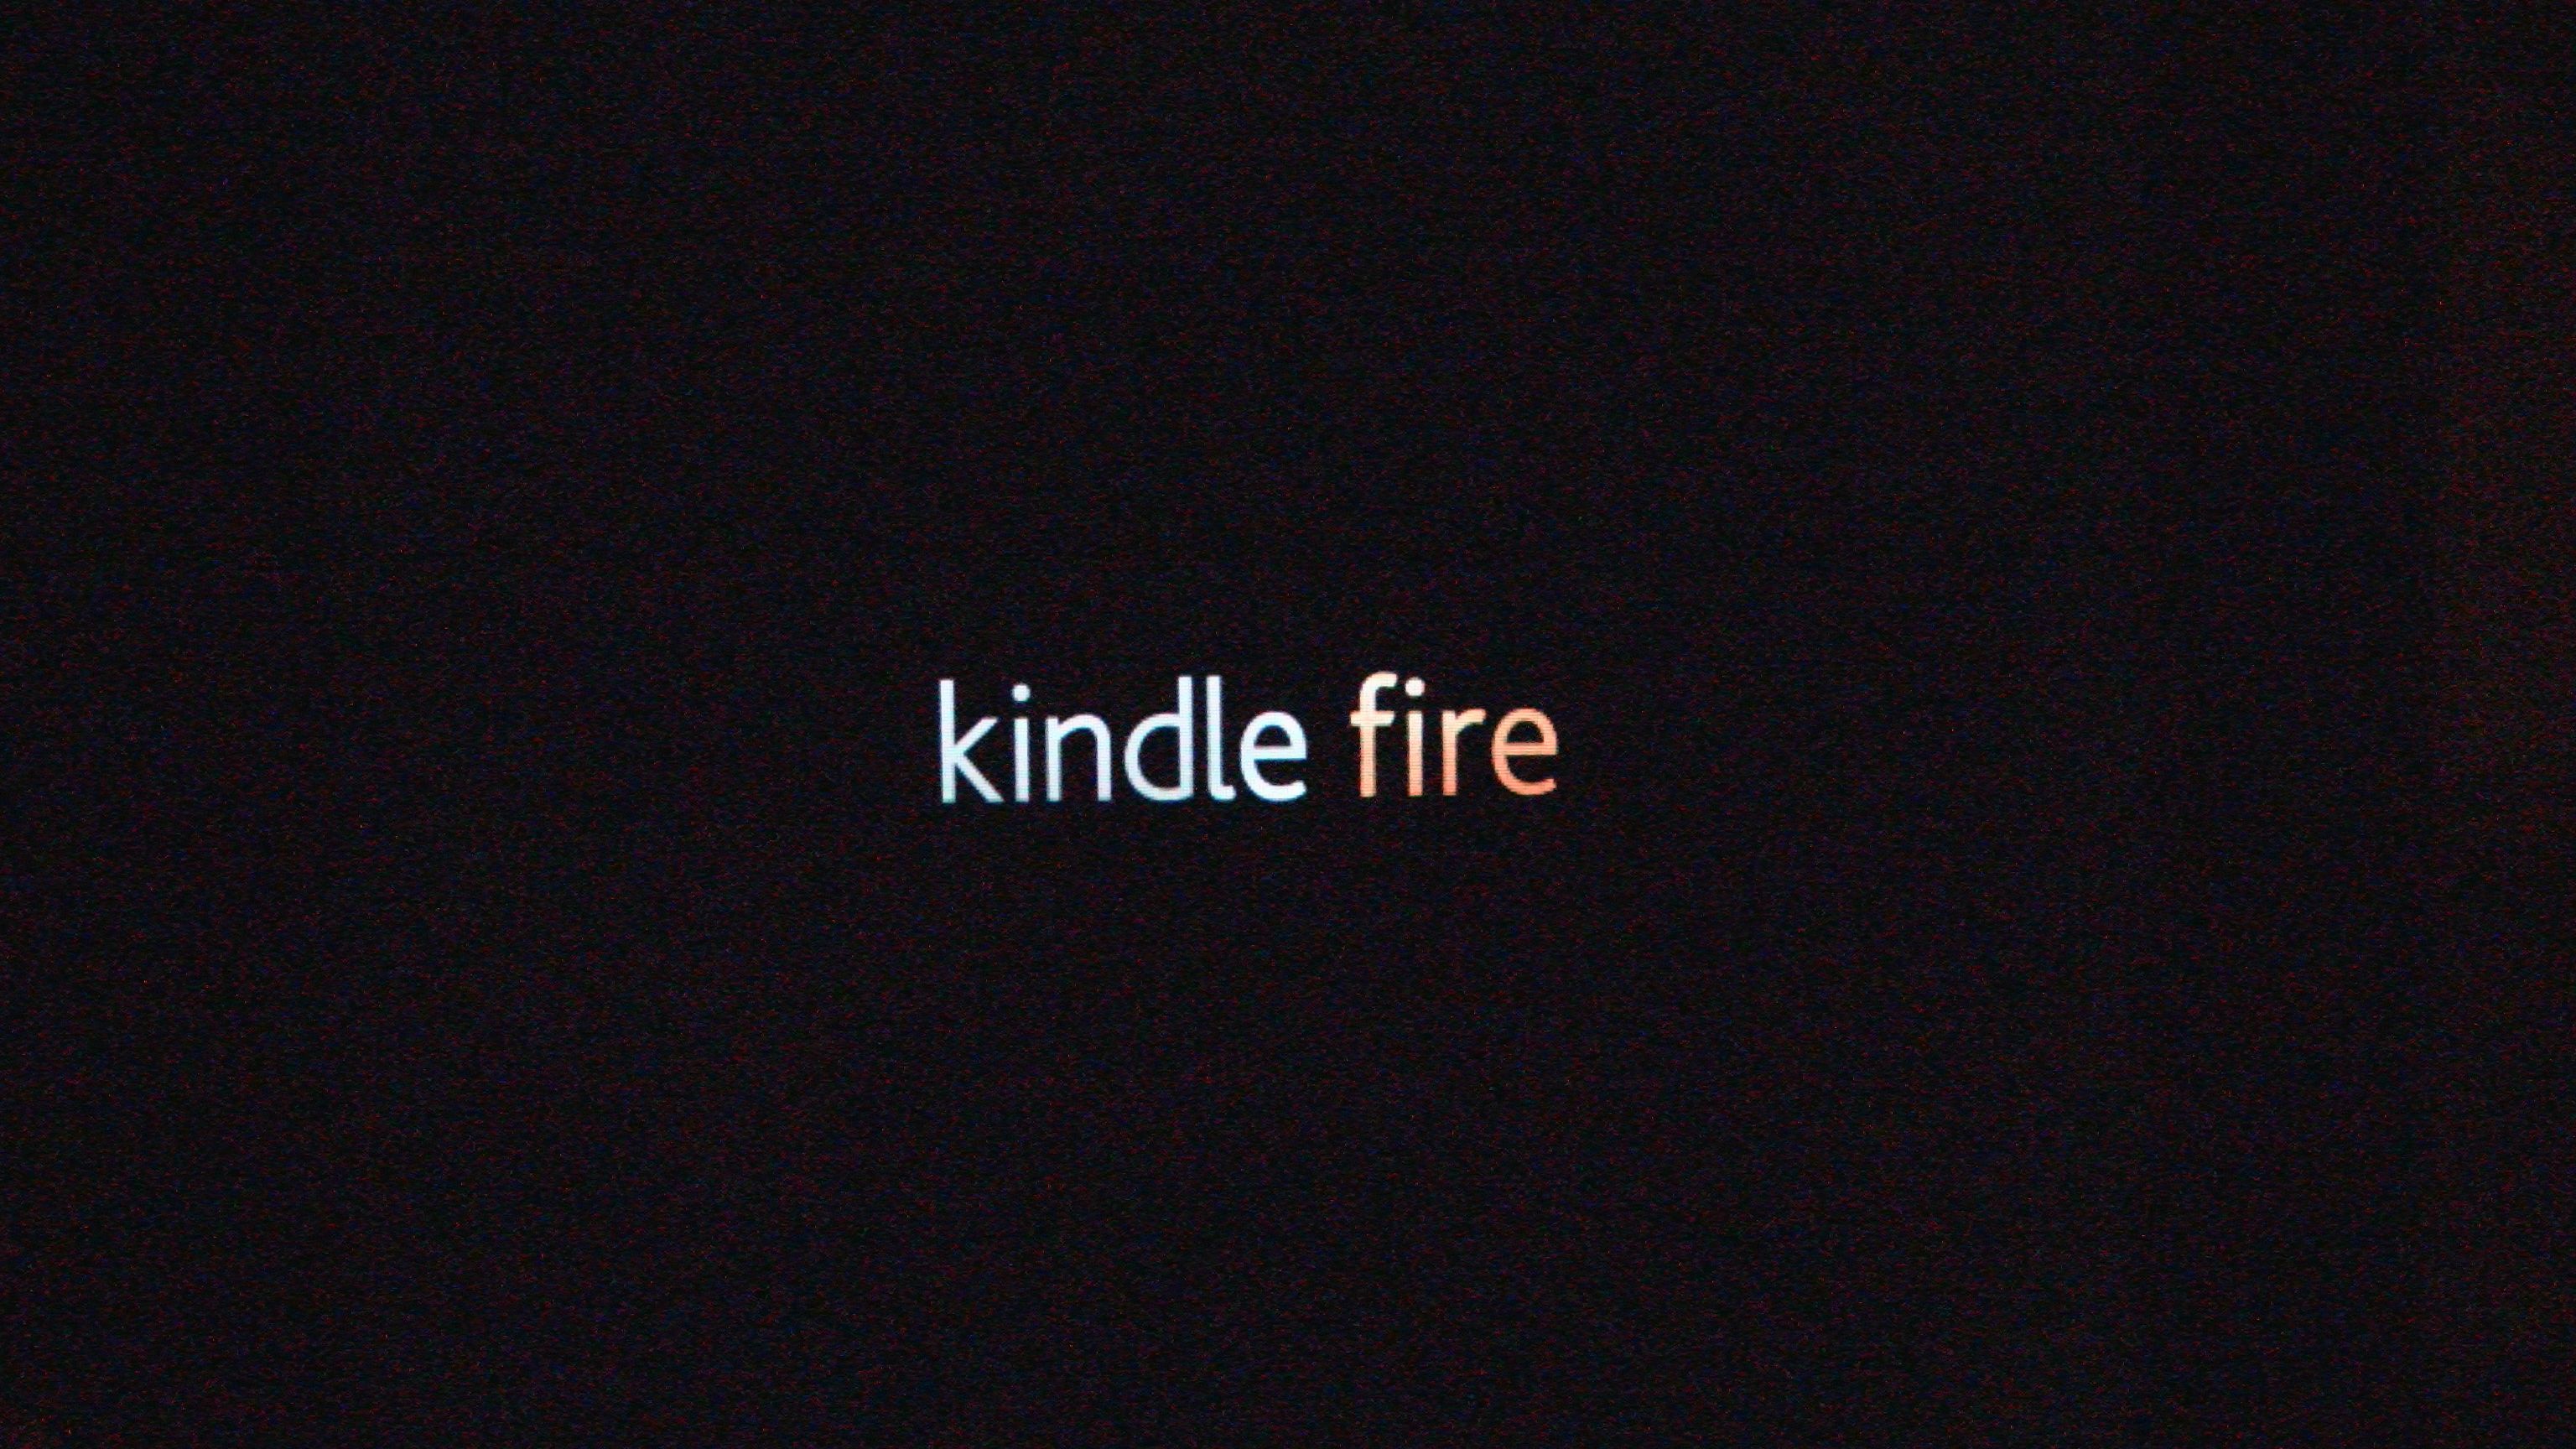 Best 48+ Kindle Logo Wallpapers on HipWallpapers